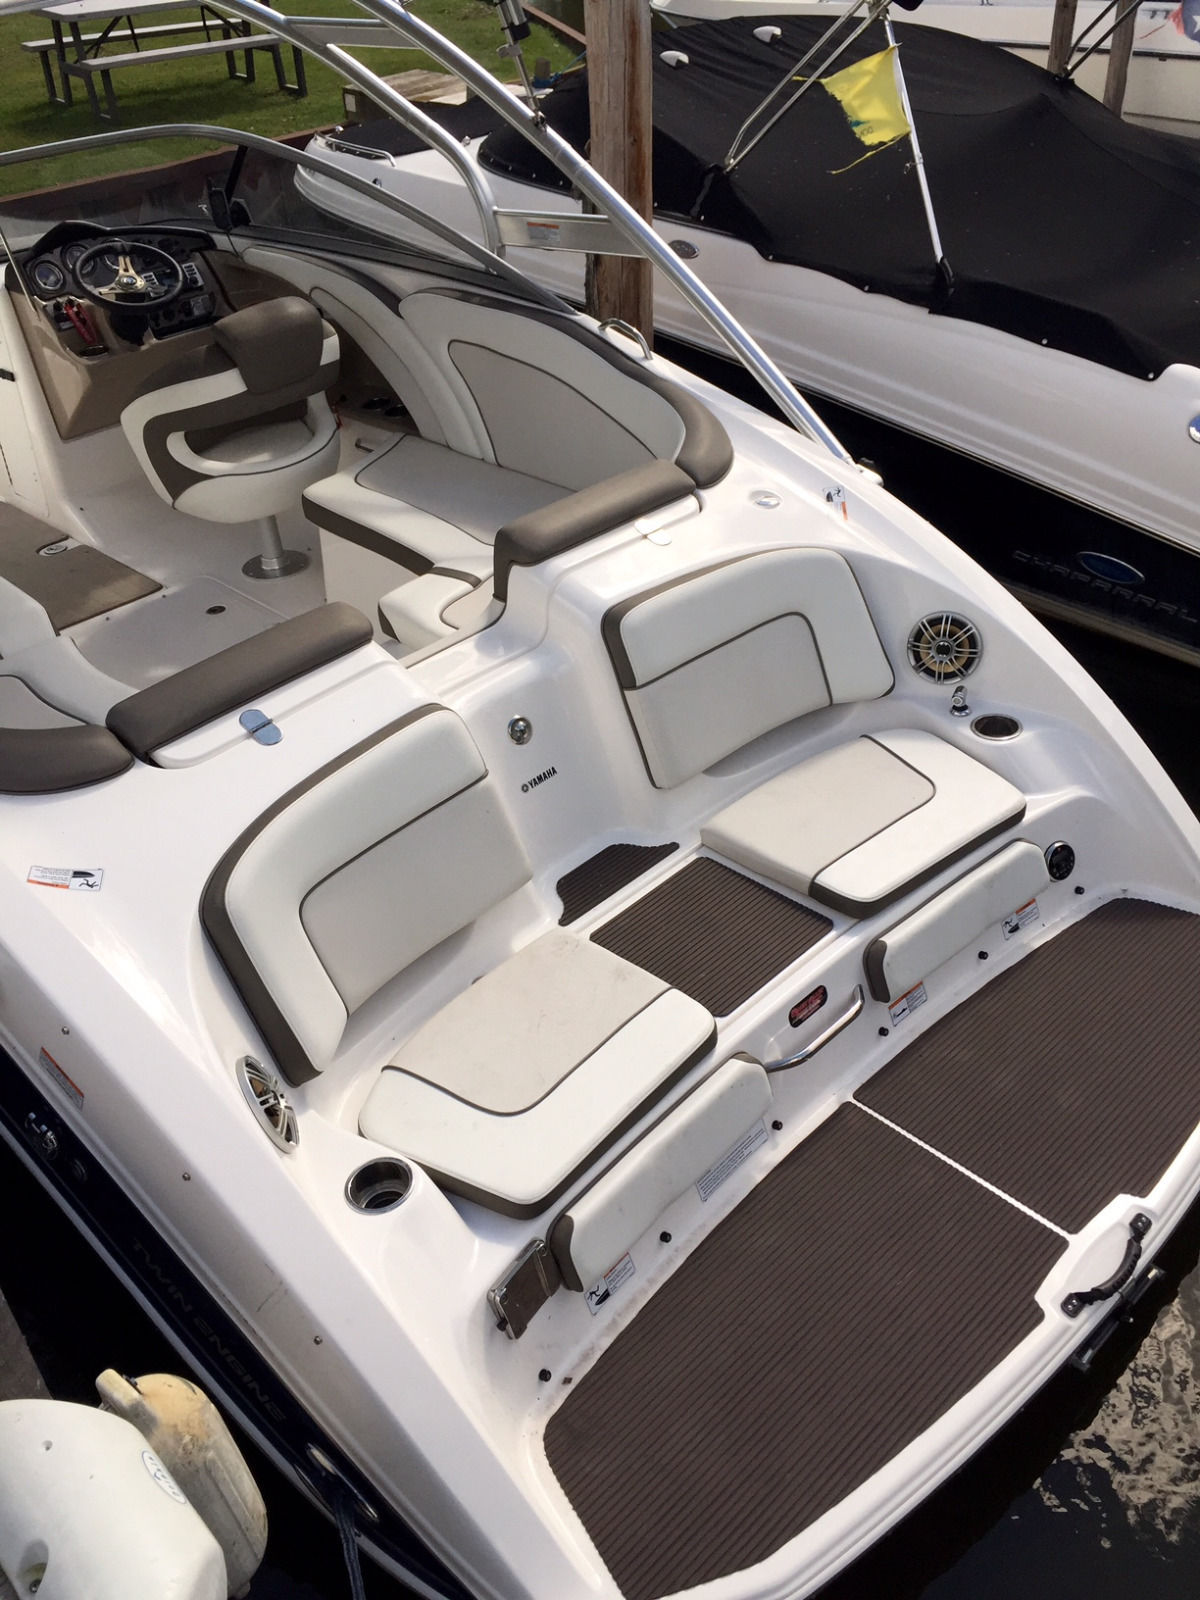 Yamaha 242 Limited S 2013 for sale for $32,499 - Boats ...